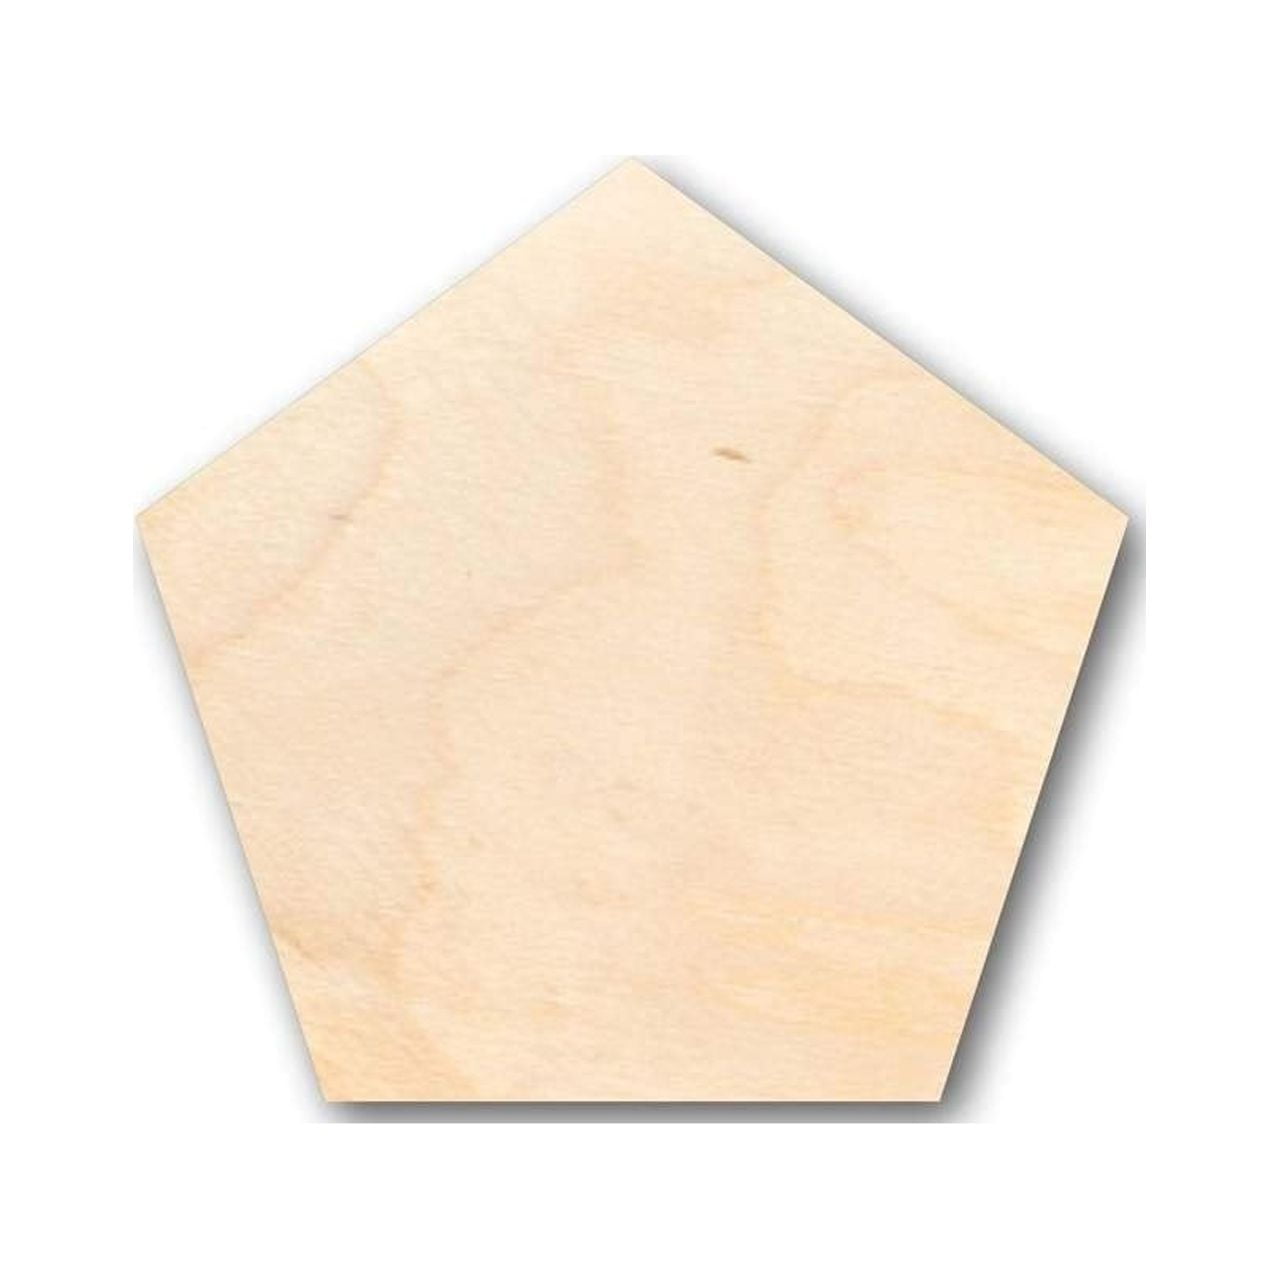 24 Pack - 4.5 Inch Wood Male & Female Shapes, Wood Natural Slices Wooden  Cutouts for DIY Crafts Painting Staining Burning, School Projects -  Wholesale Craft Outlet